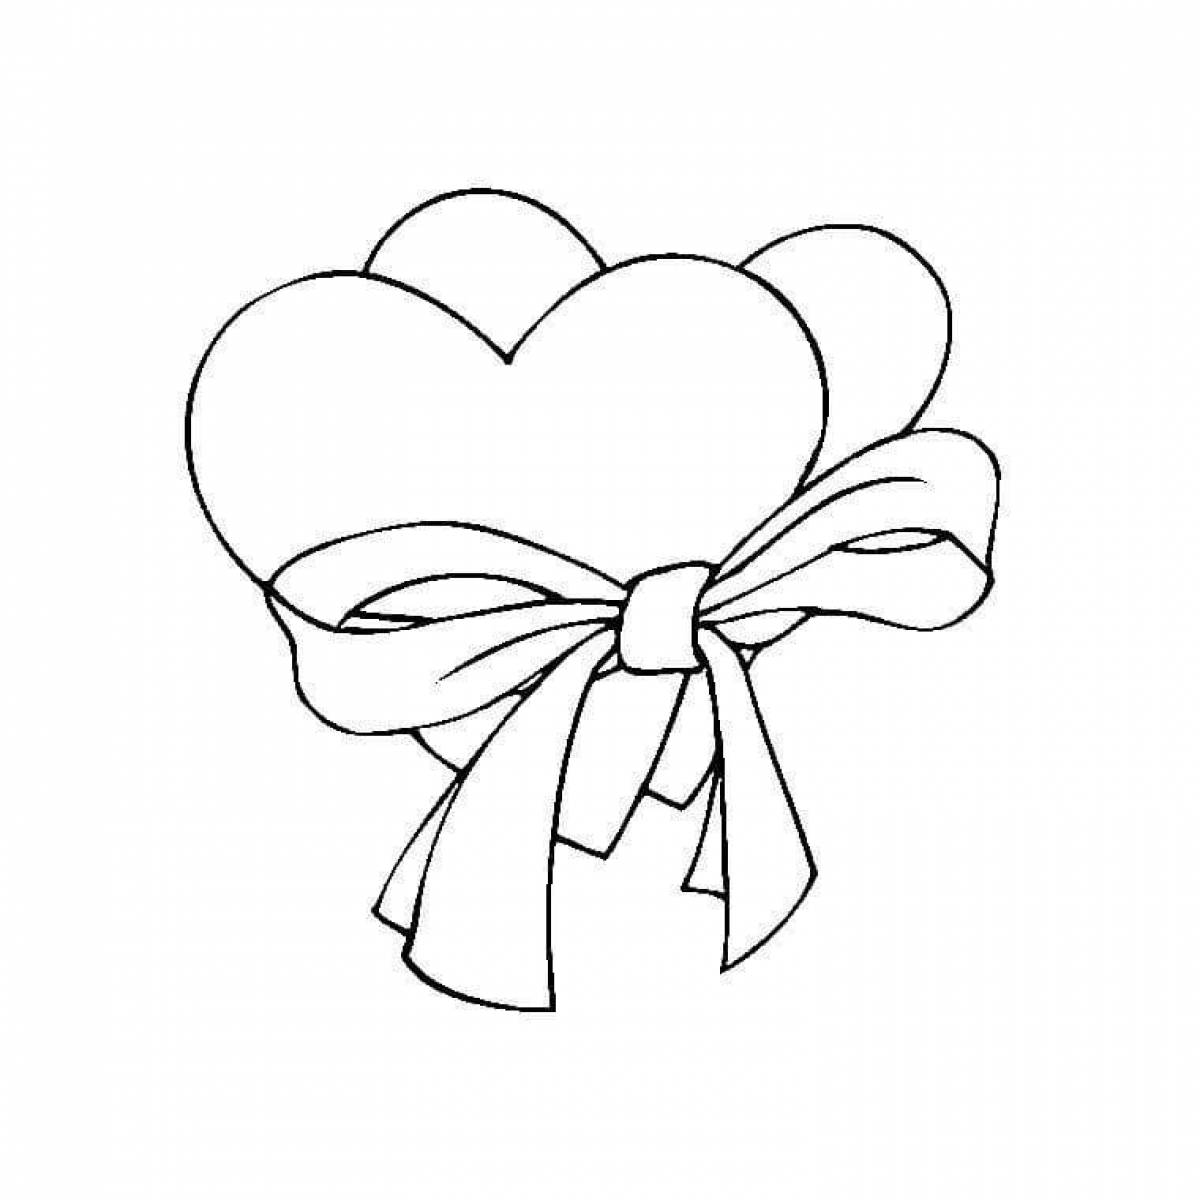 Adorable bow coloring page